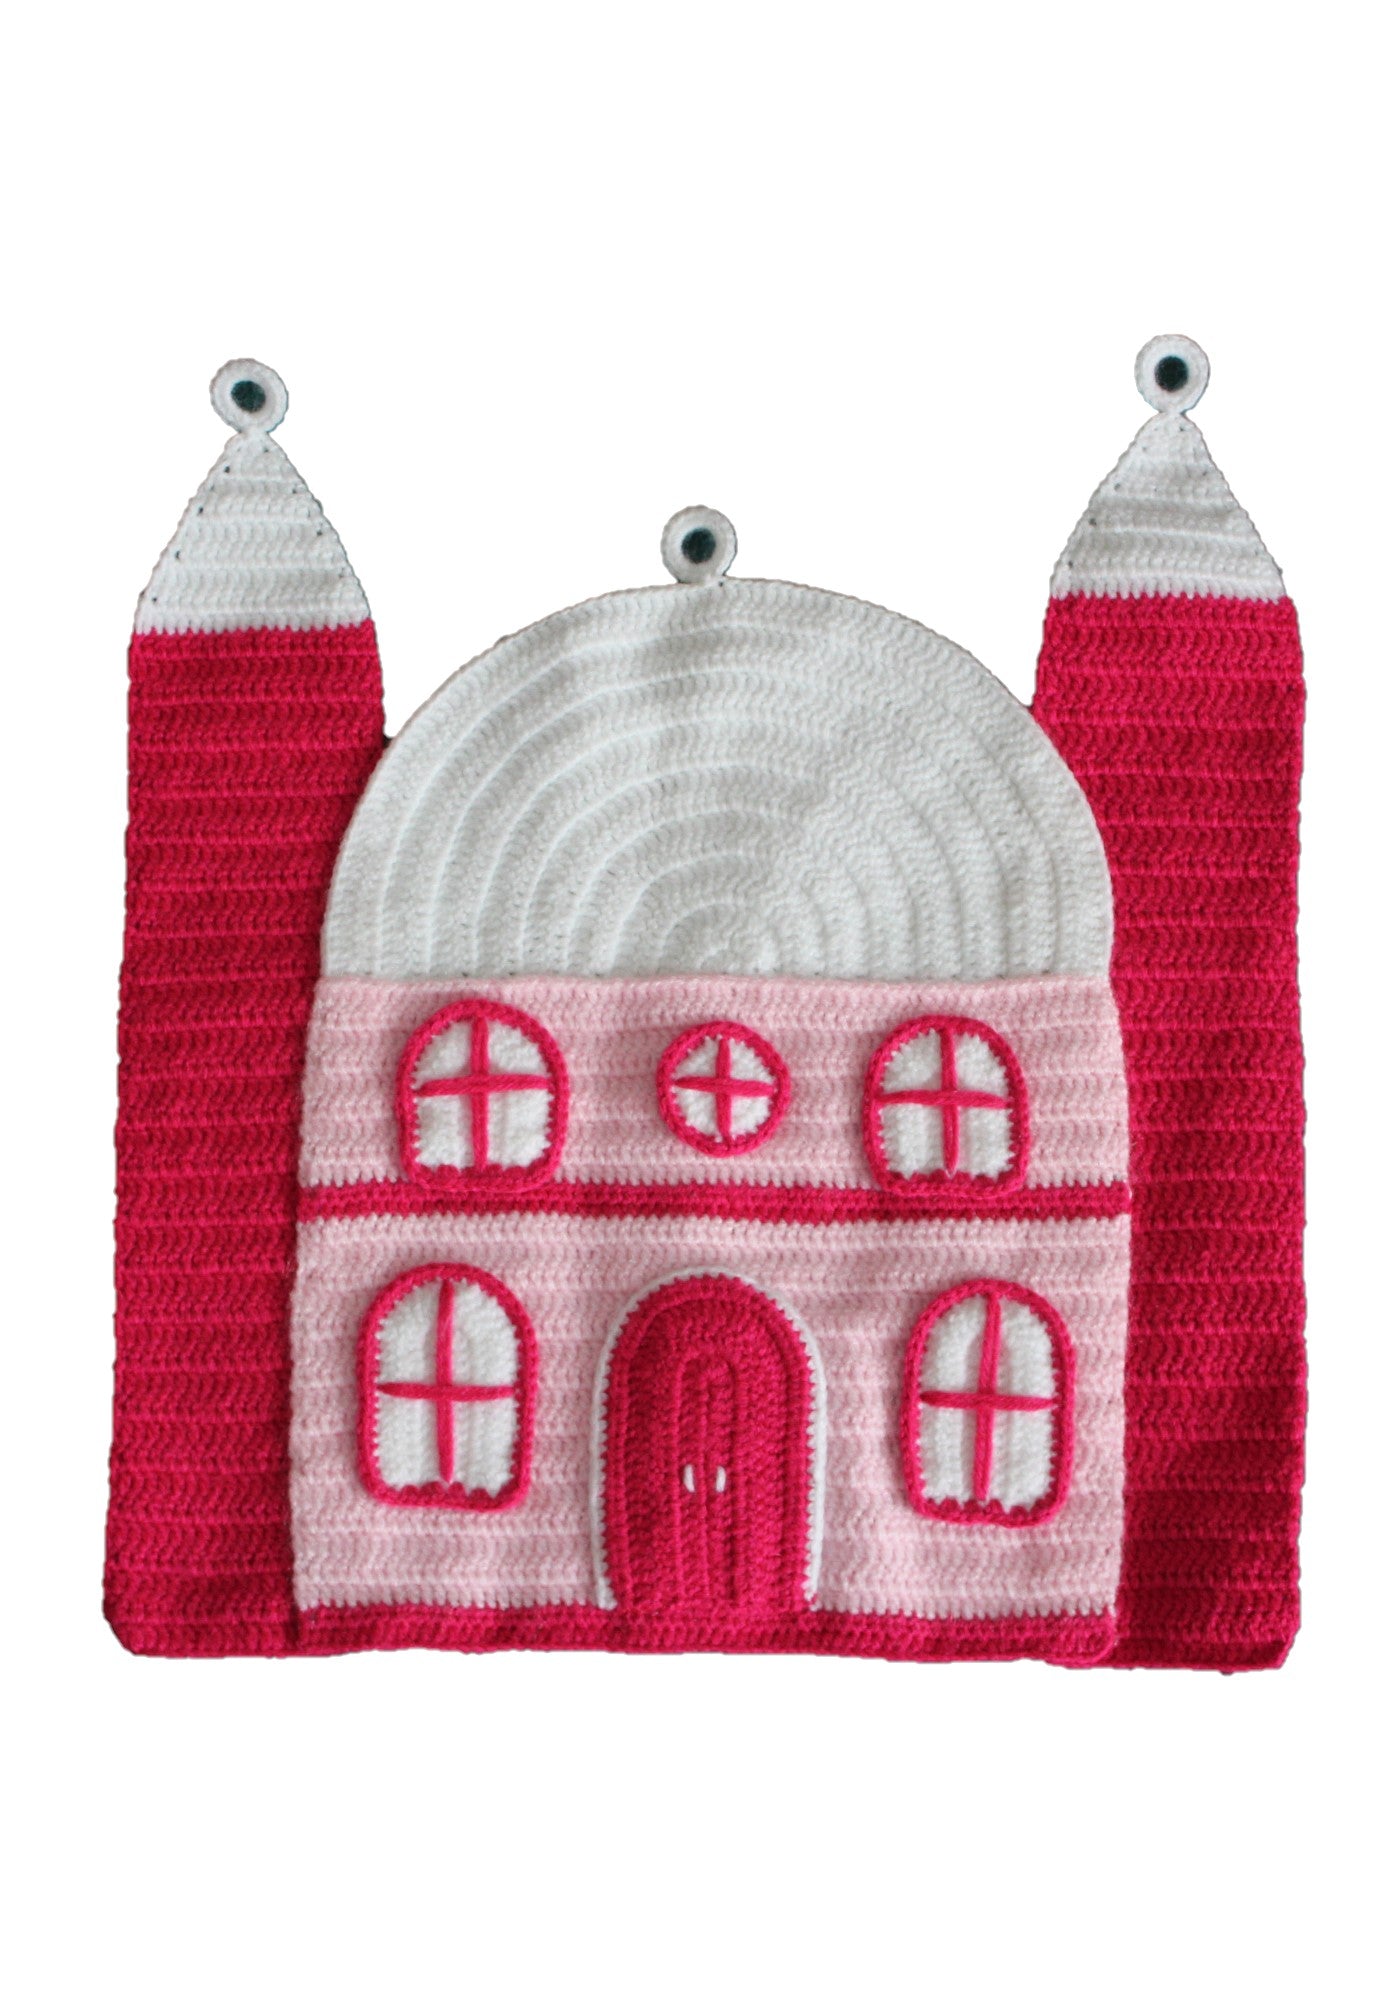 Crochet Pink Mosque Wall Hanging by OAK Charity